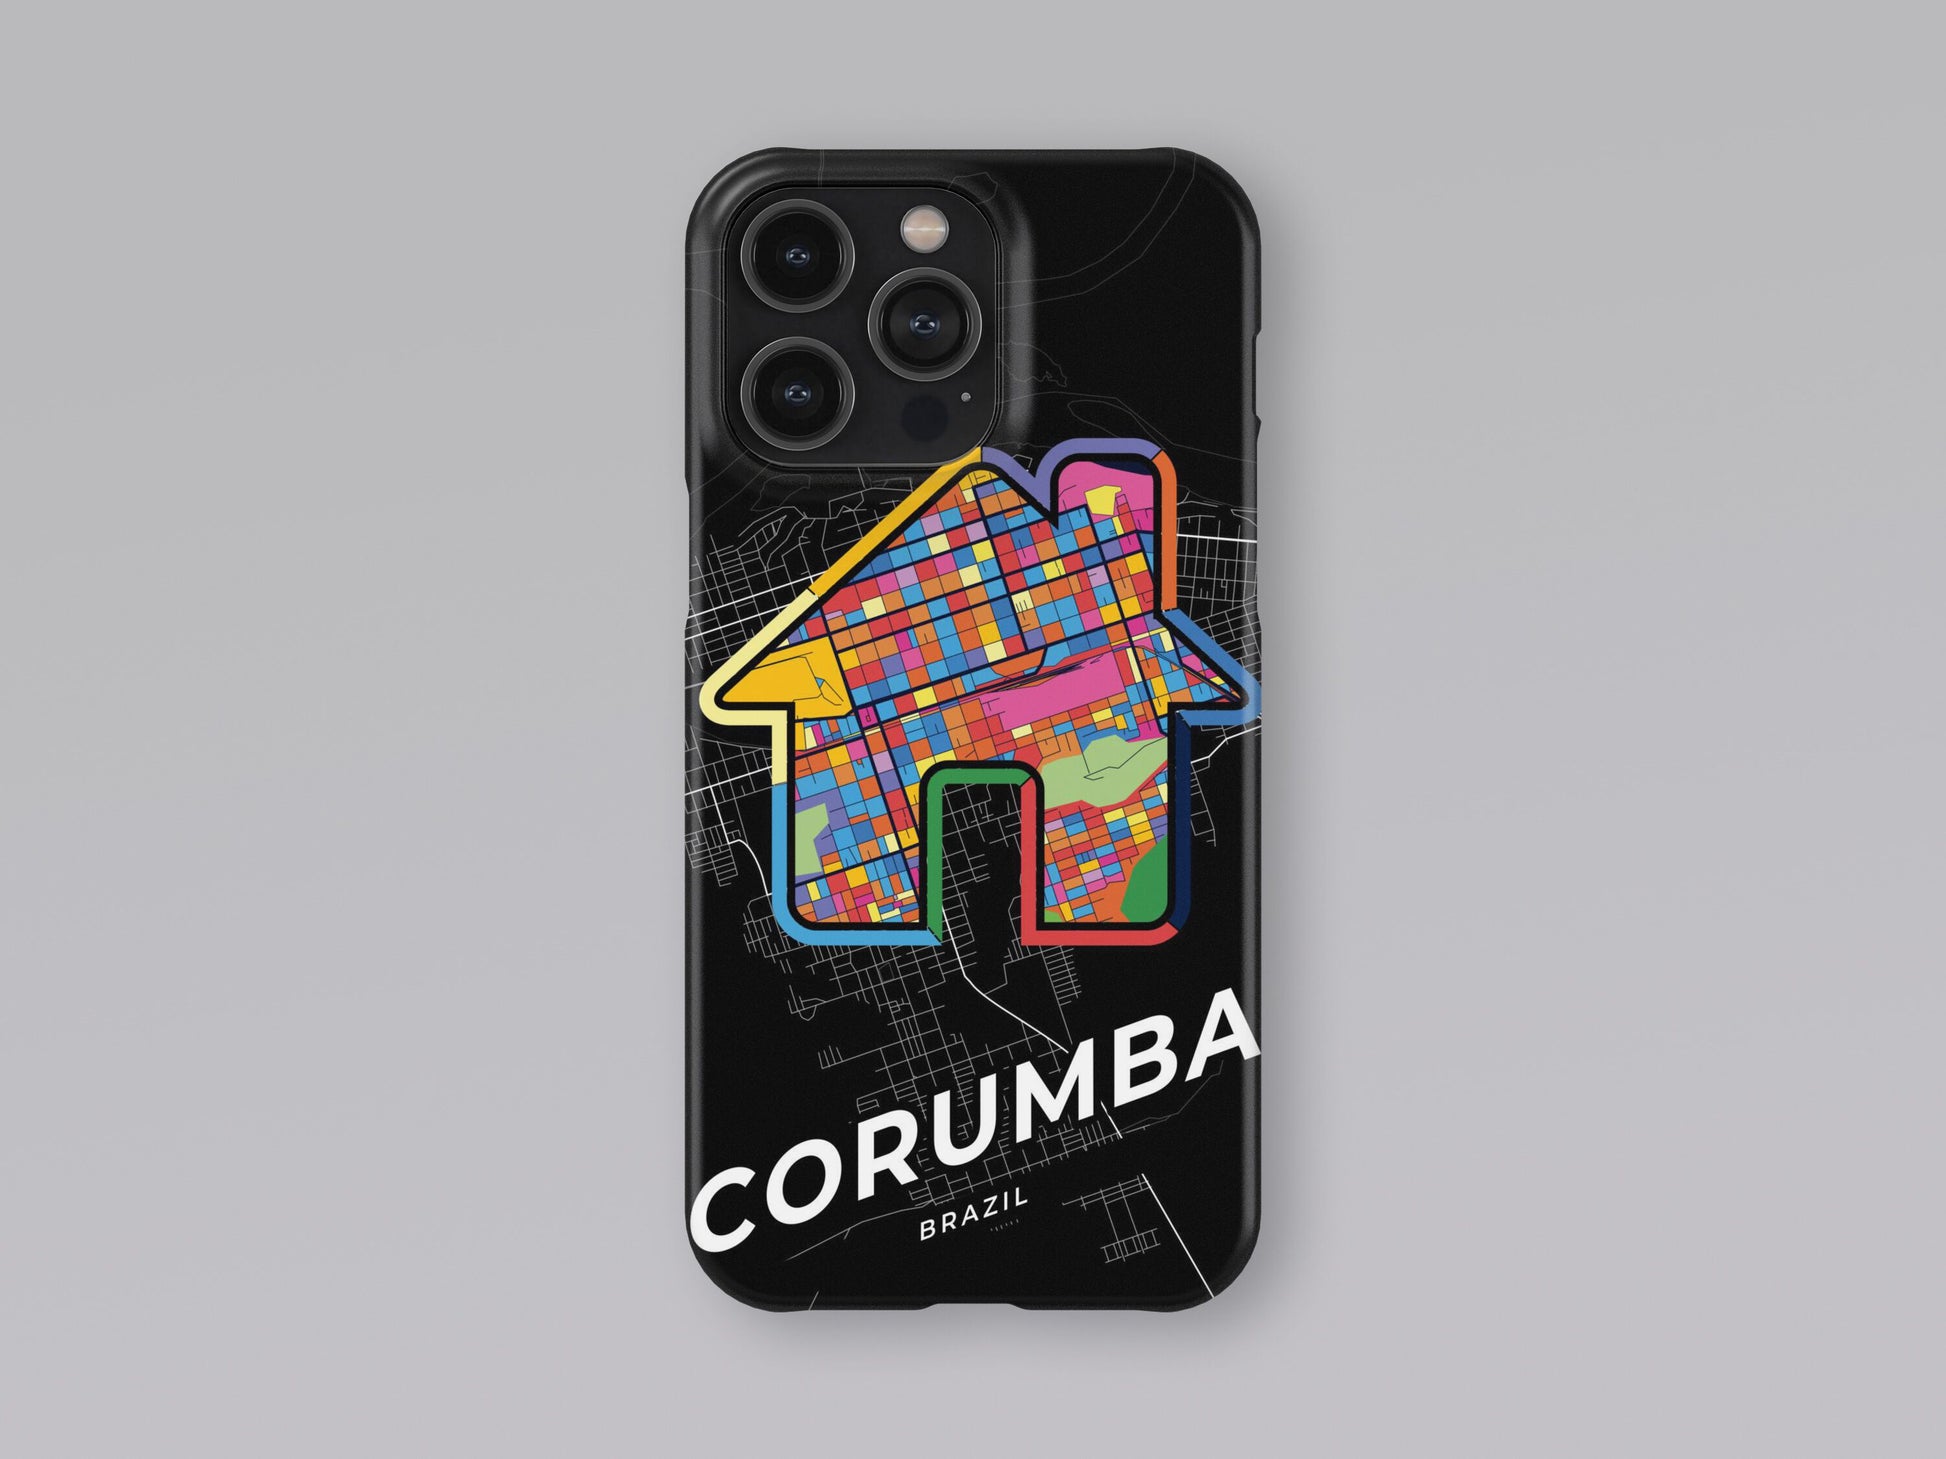 Corumba Brazil slim phone case with colorful icon. Birthday, wedding or housewarming gift. Couple match cases. 3